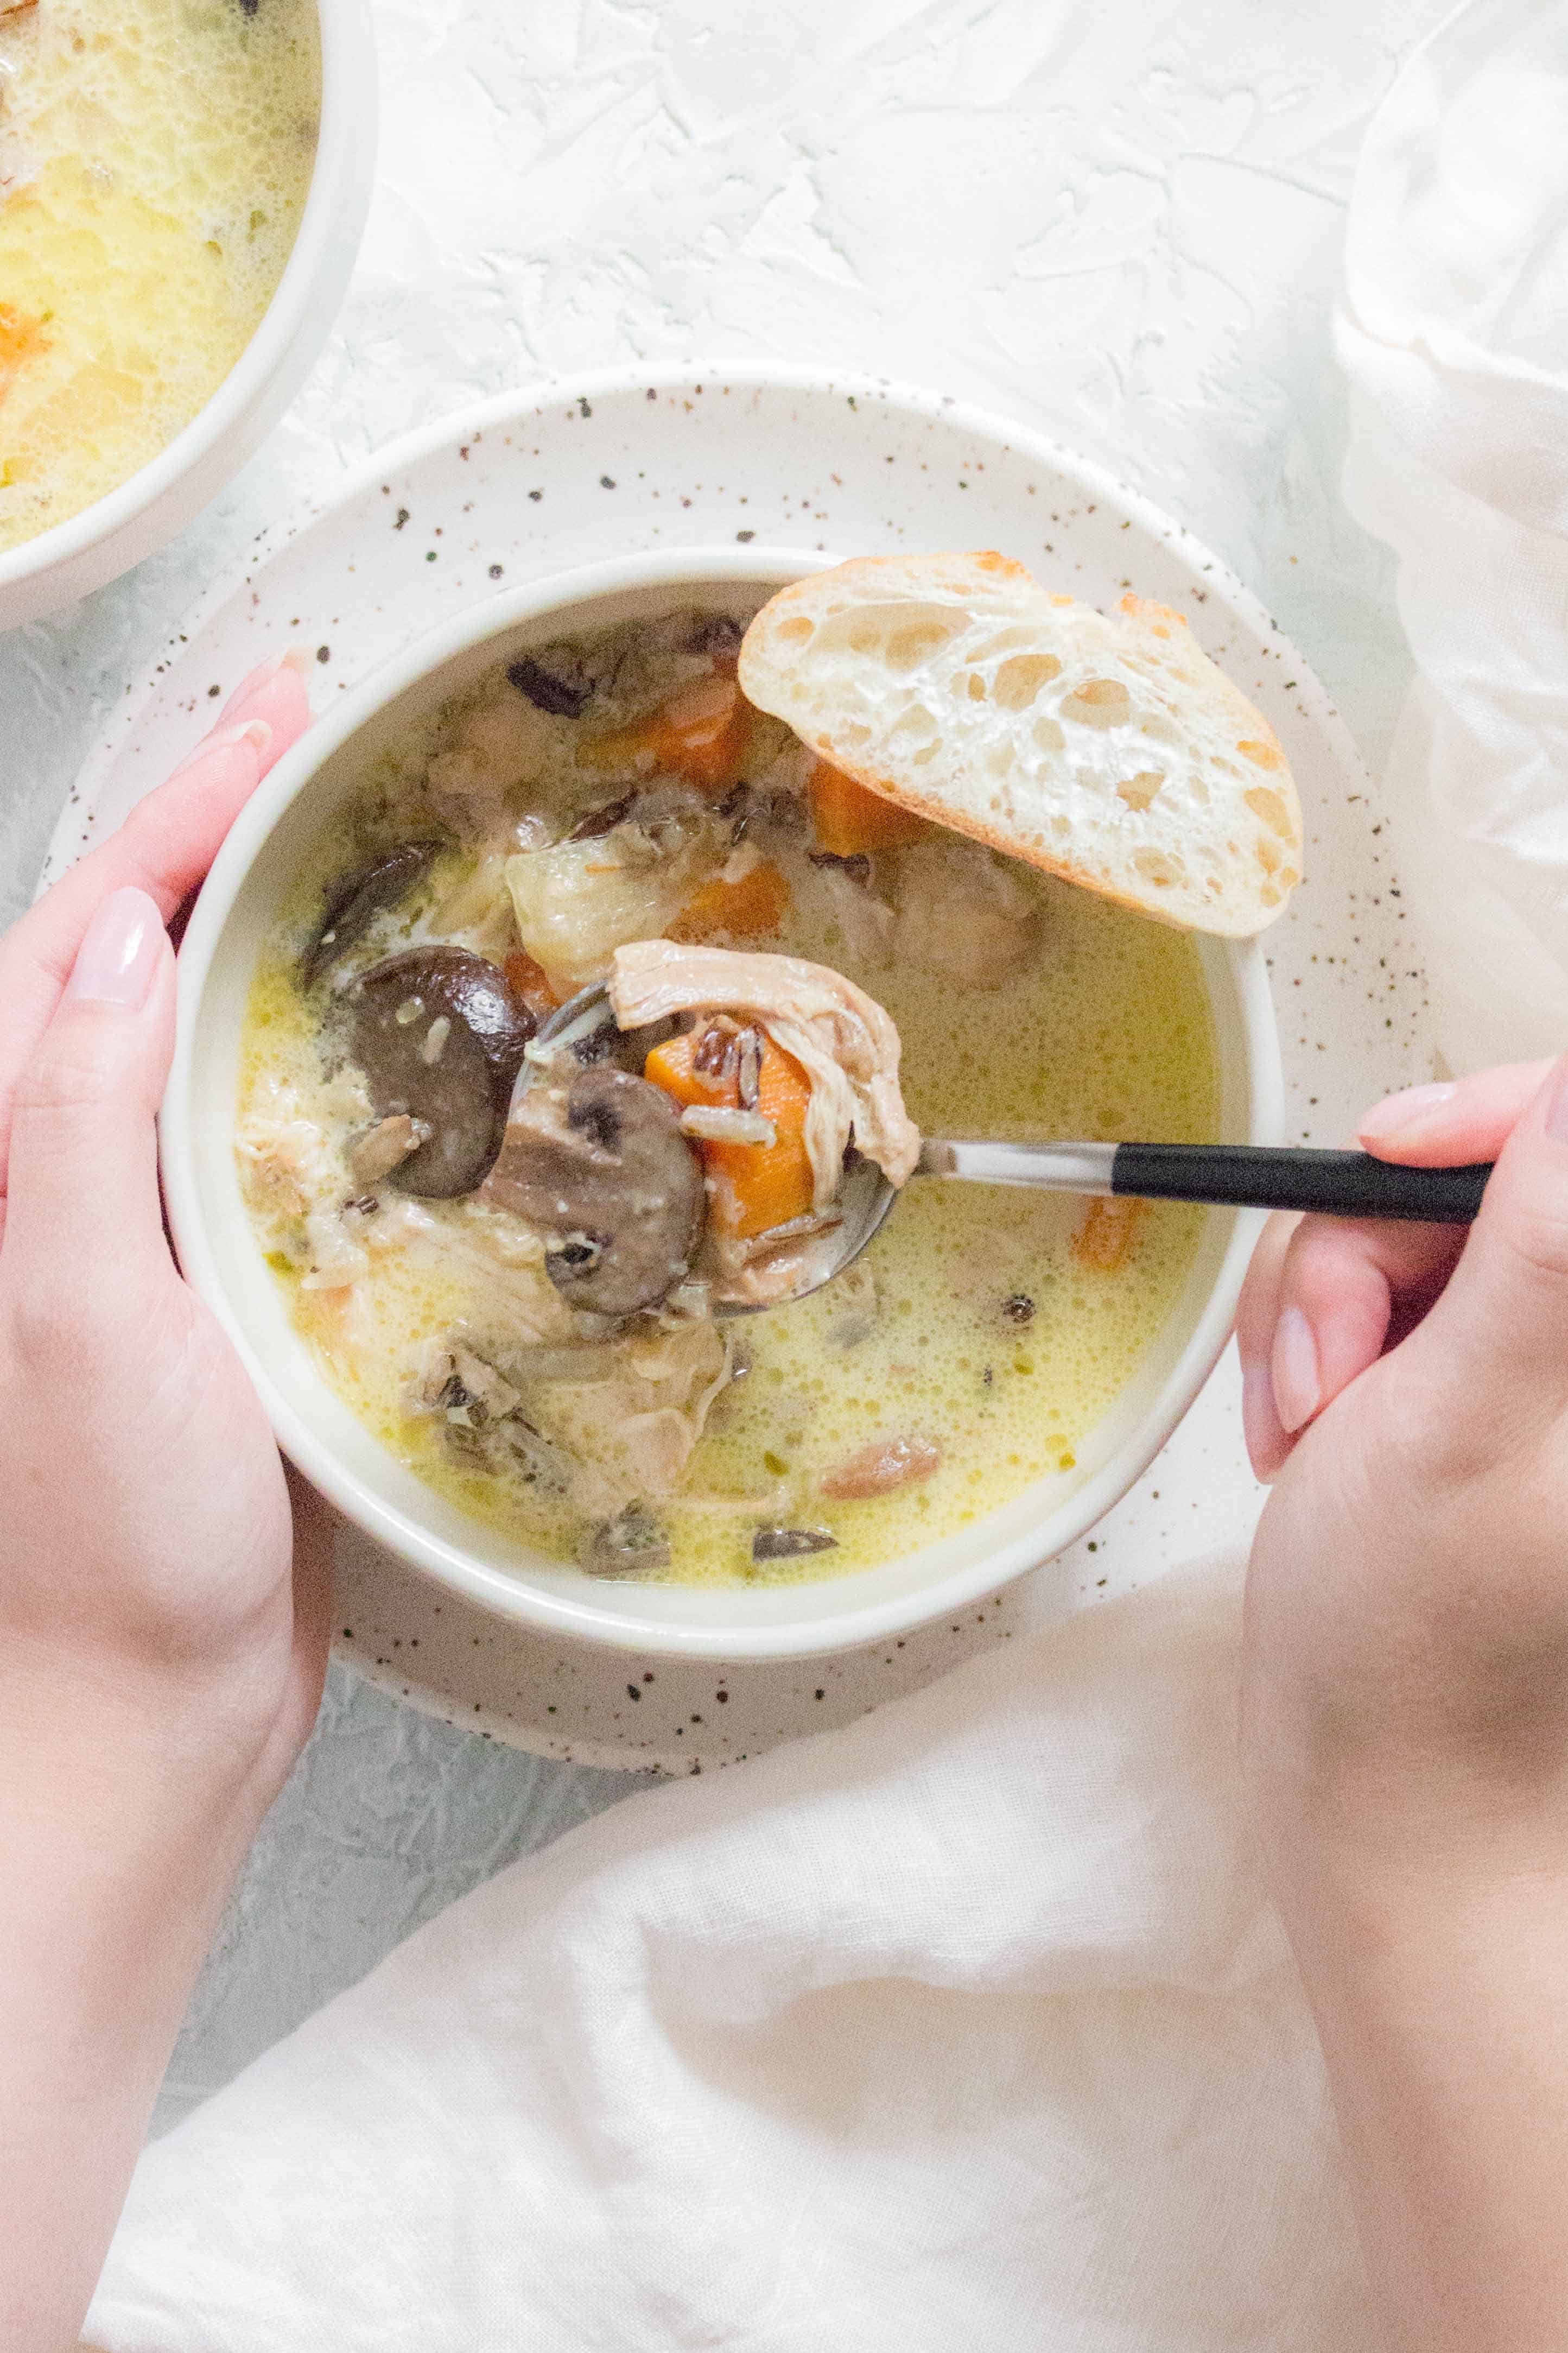 Rich, creamy, and easy to make, this Instant Pot Chicken and Wild Rice Soup is going to warm you right up! (Freezer and Slow Cooker Instructions included)